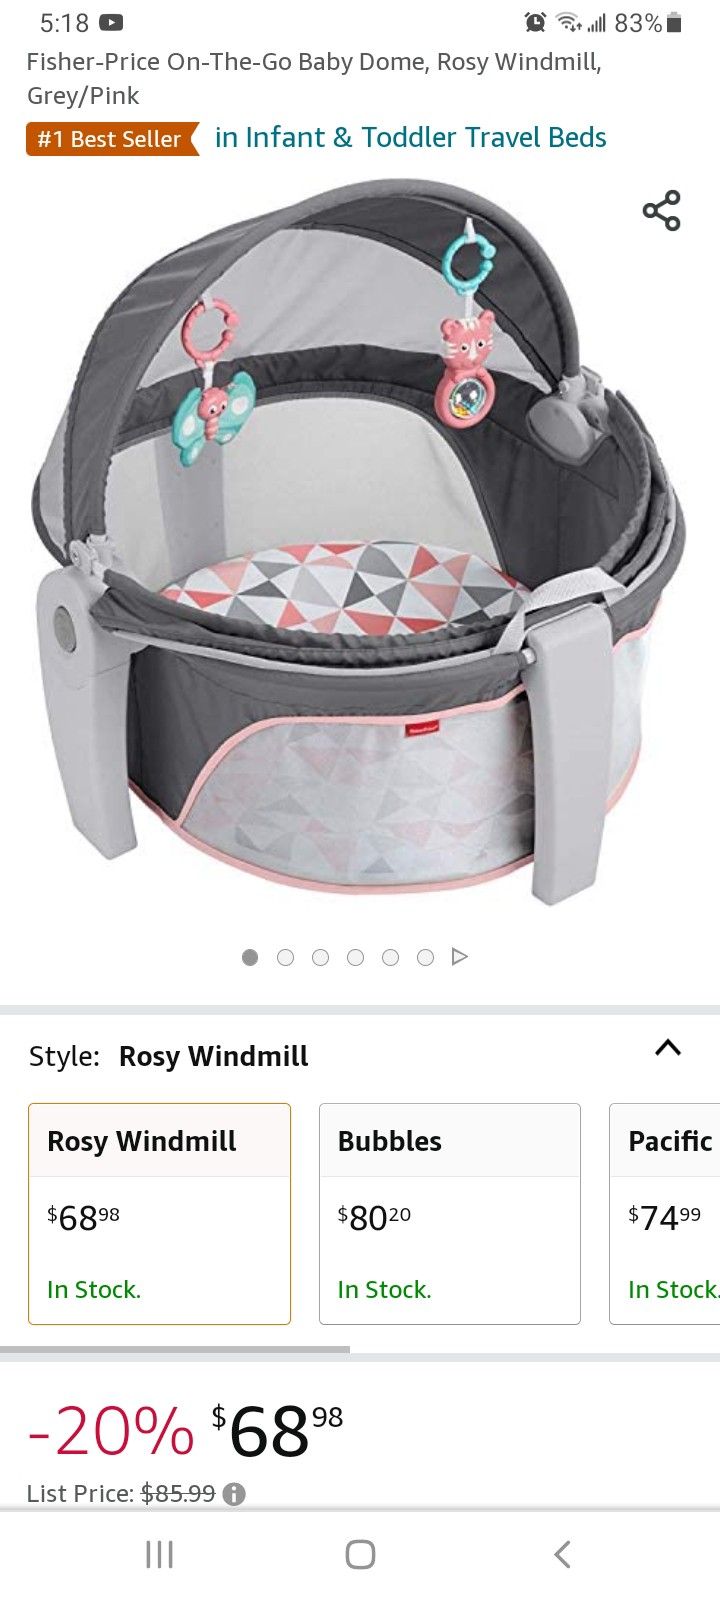 SUN SHADE DOME FOR BABY